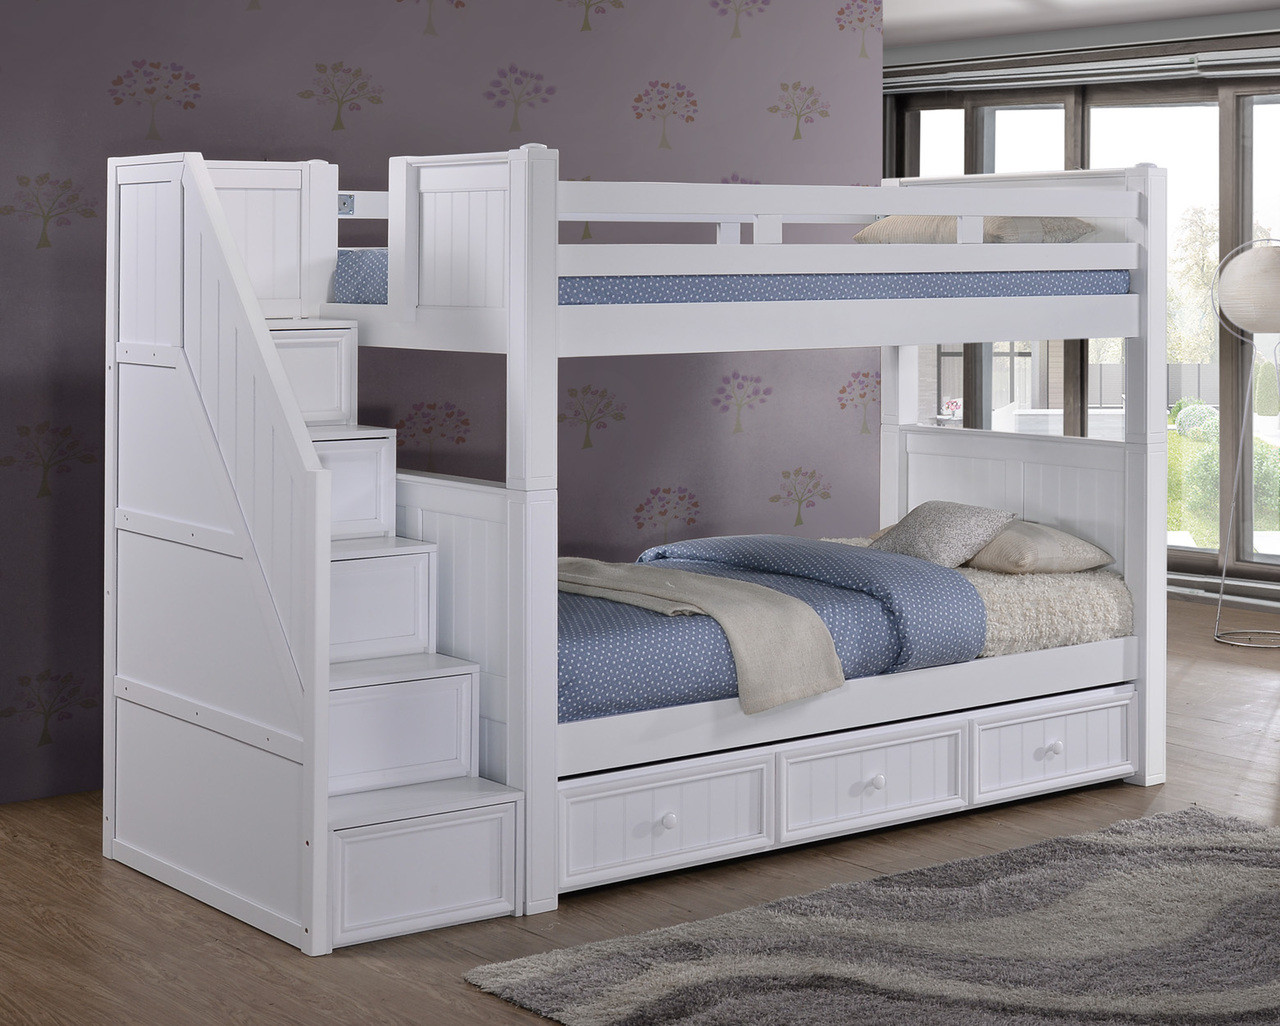 mattresses for bunk beds